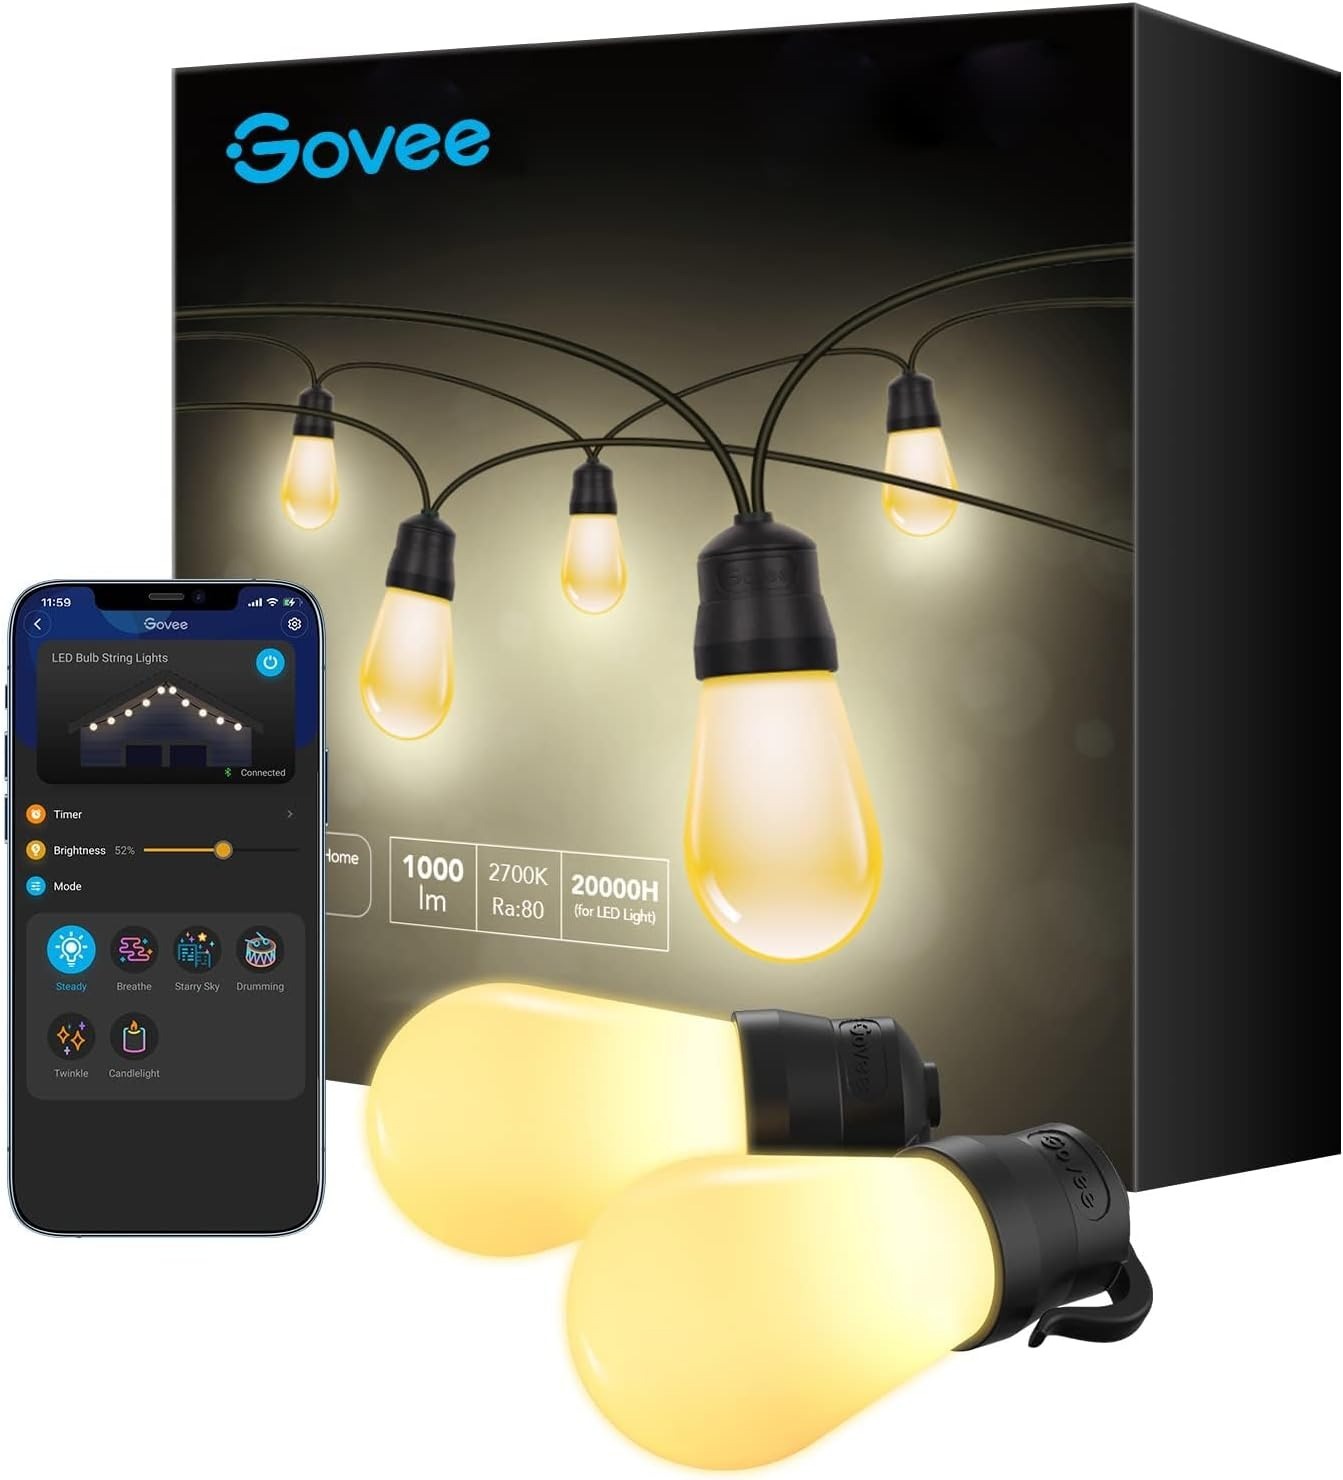 48' Govee Smart Outdoor String Lights w/ 15 Dimmable Warm White LED Bulbs $20 + Free Shipping w/ Prime